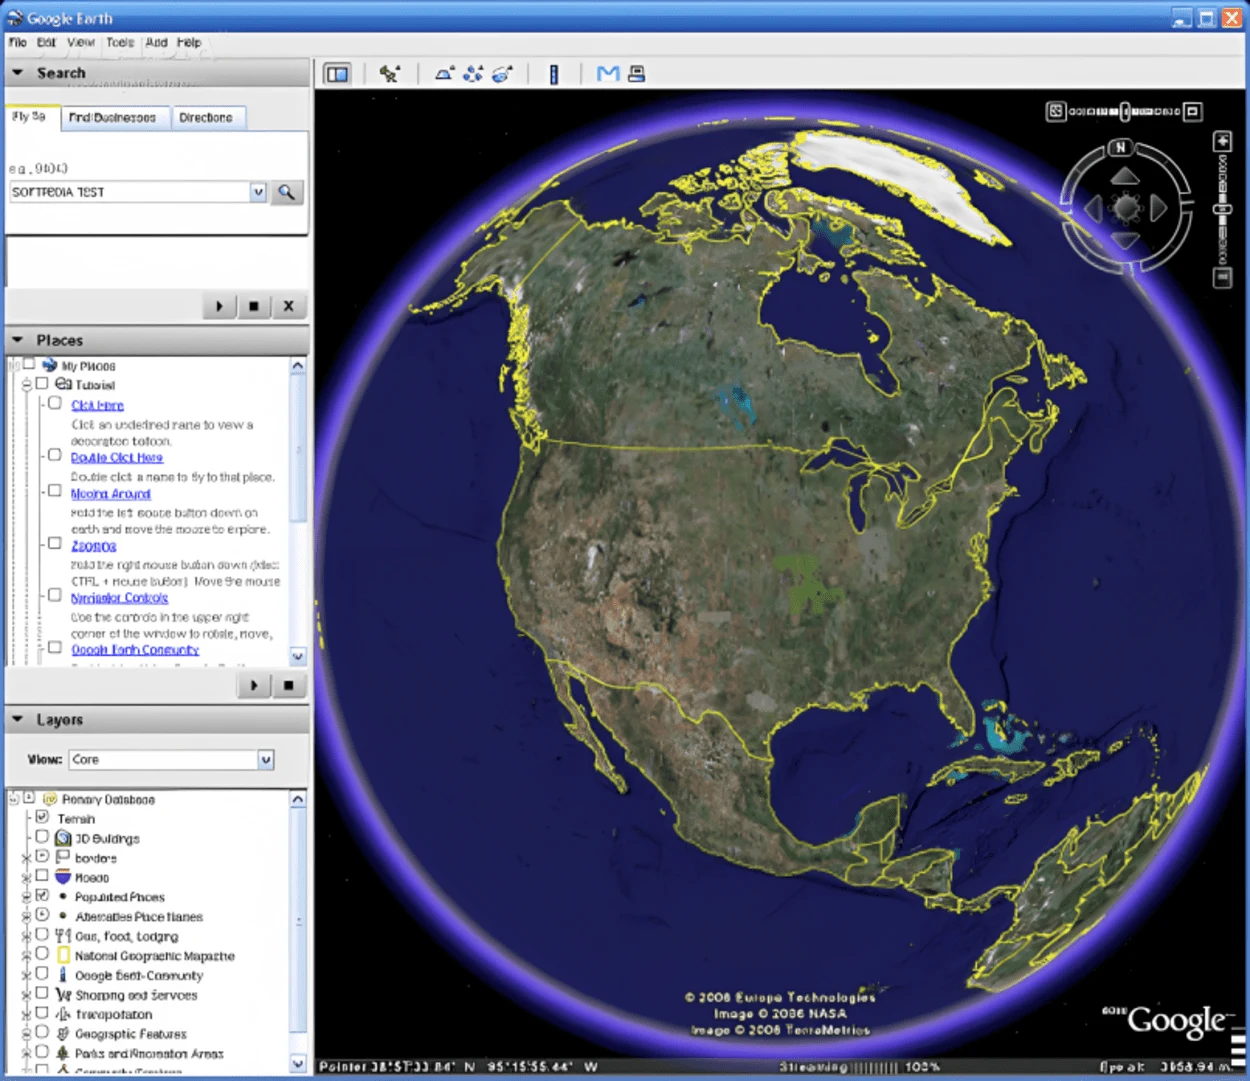 An old version of Google Earth